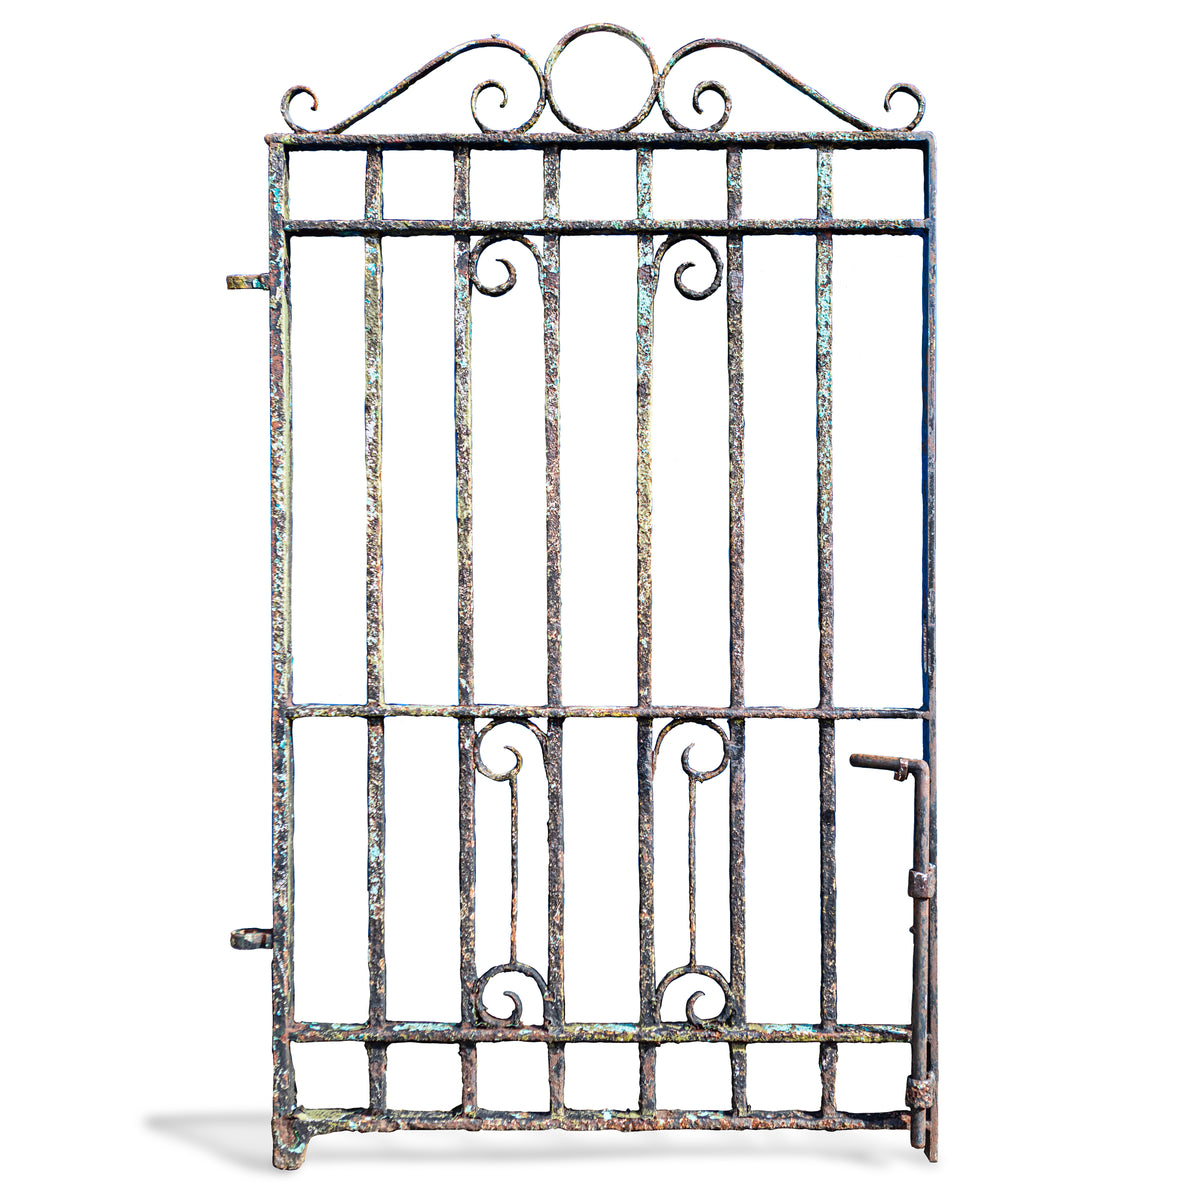 Antique Ornate Wrought Iron Gate | The Architectural Forum